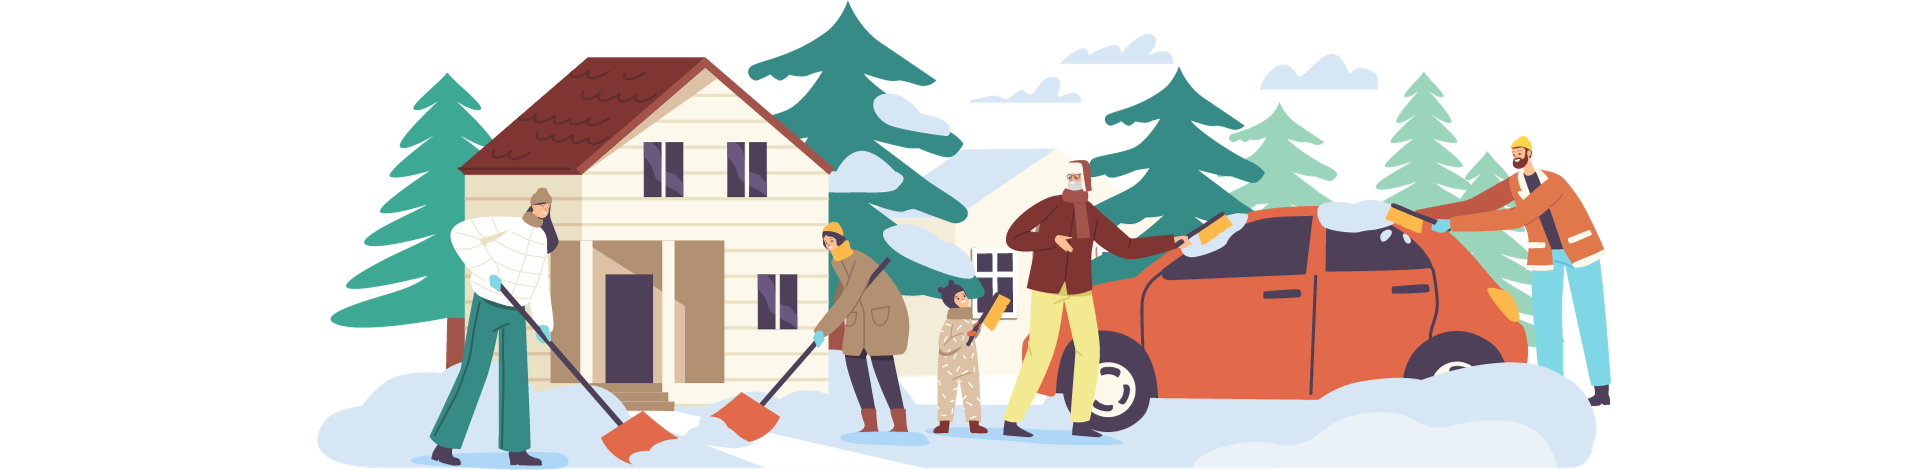 Graphic illustration of a family shoveling snow